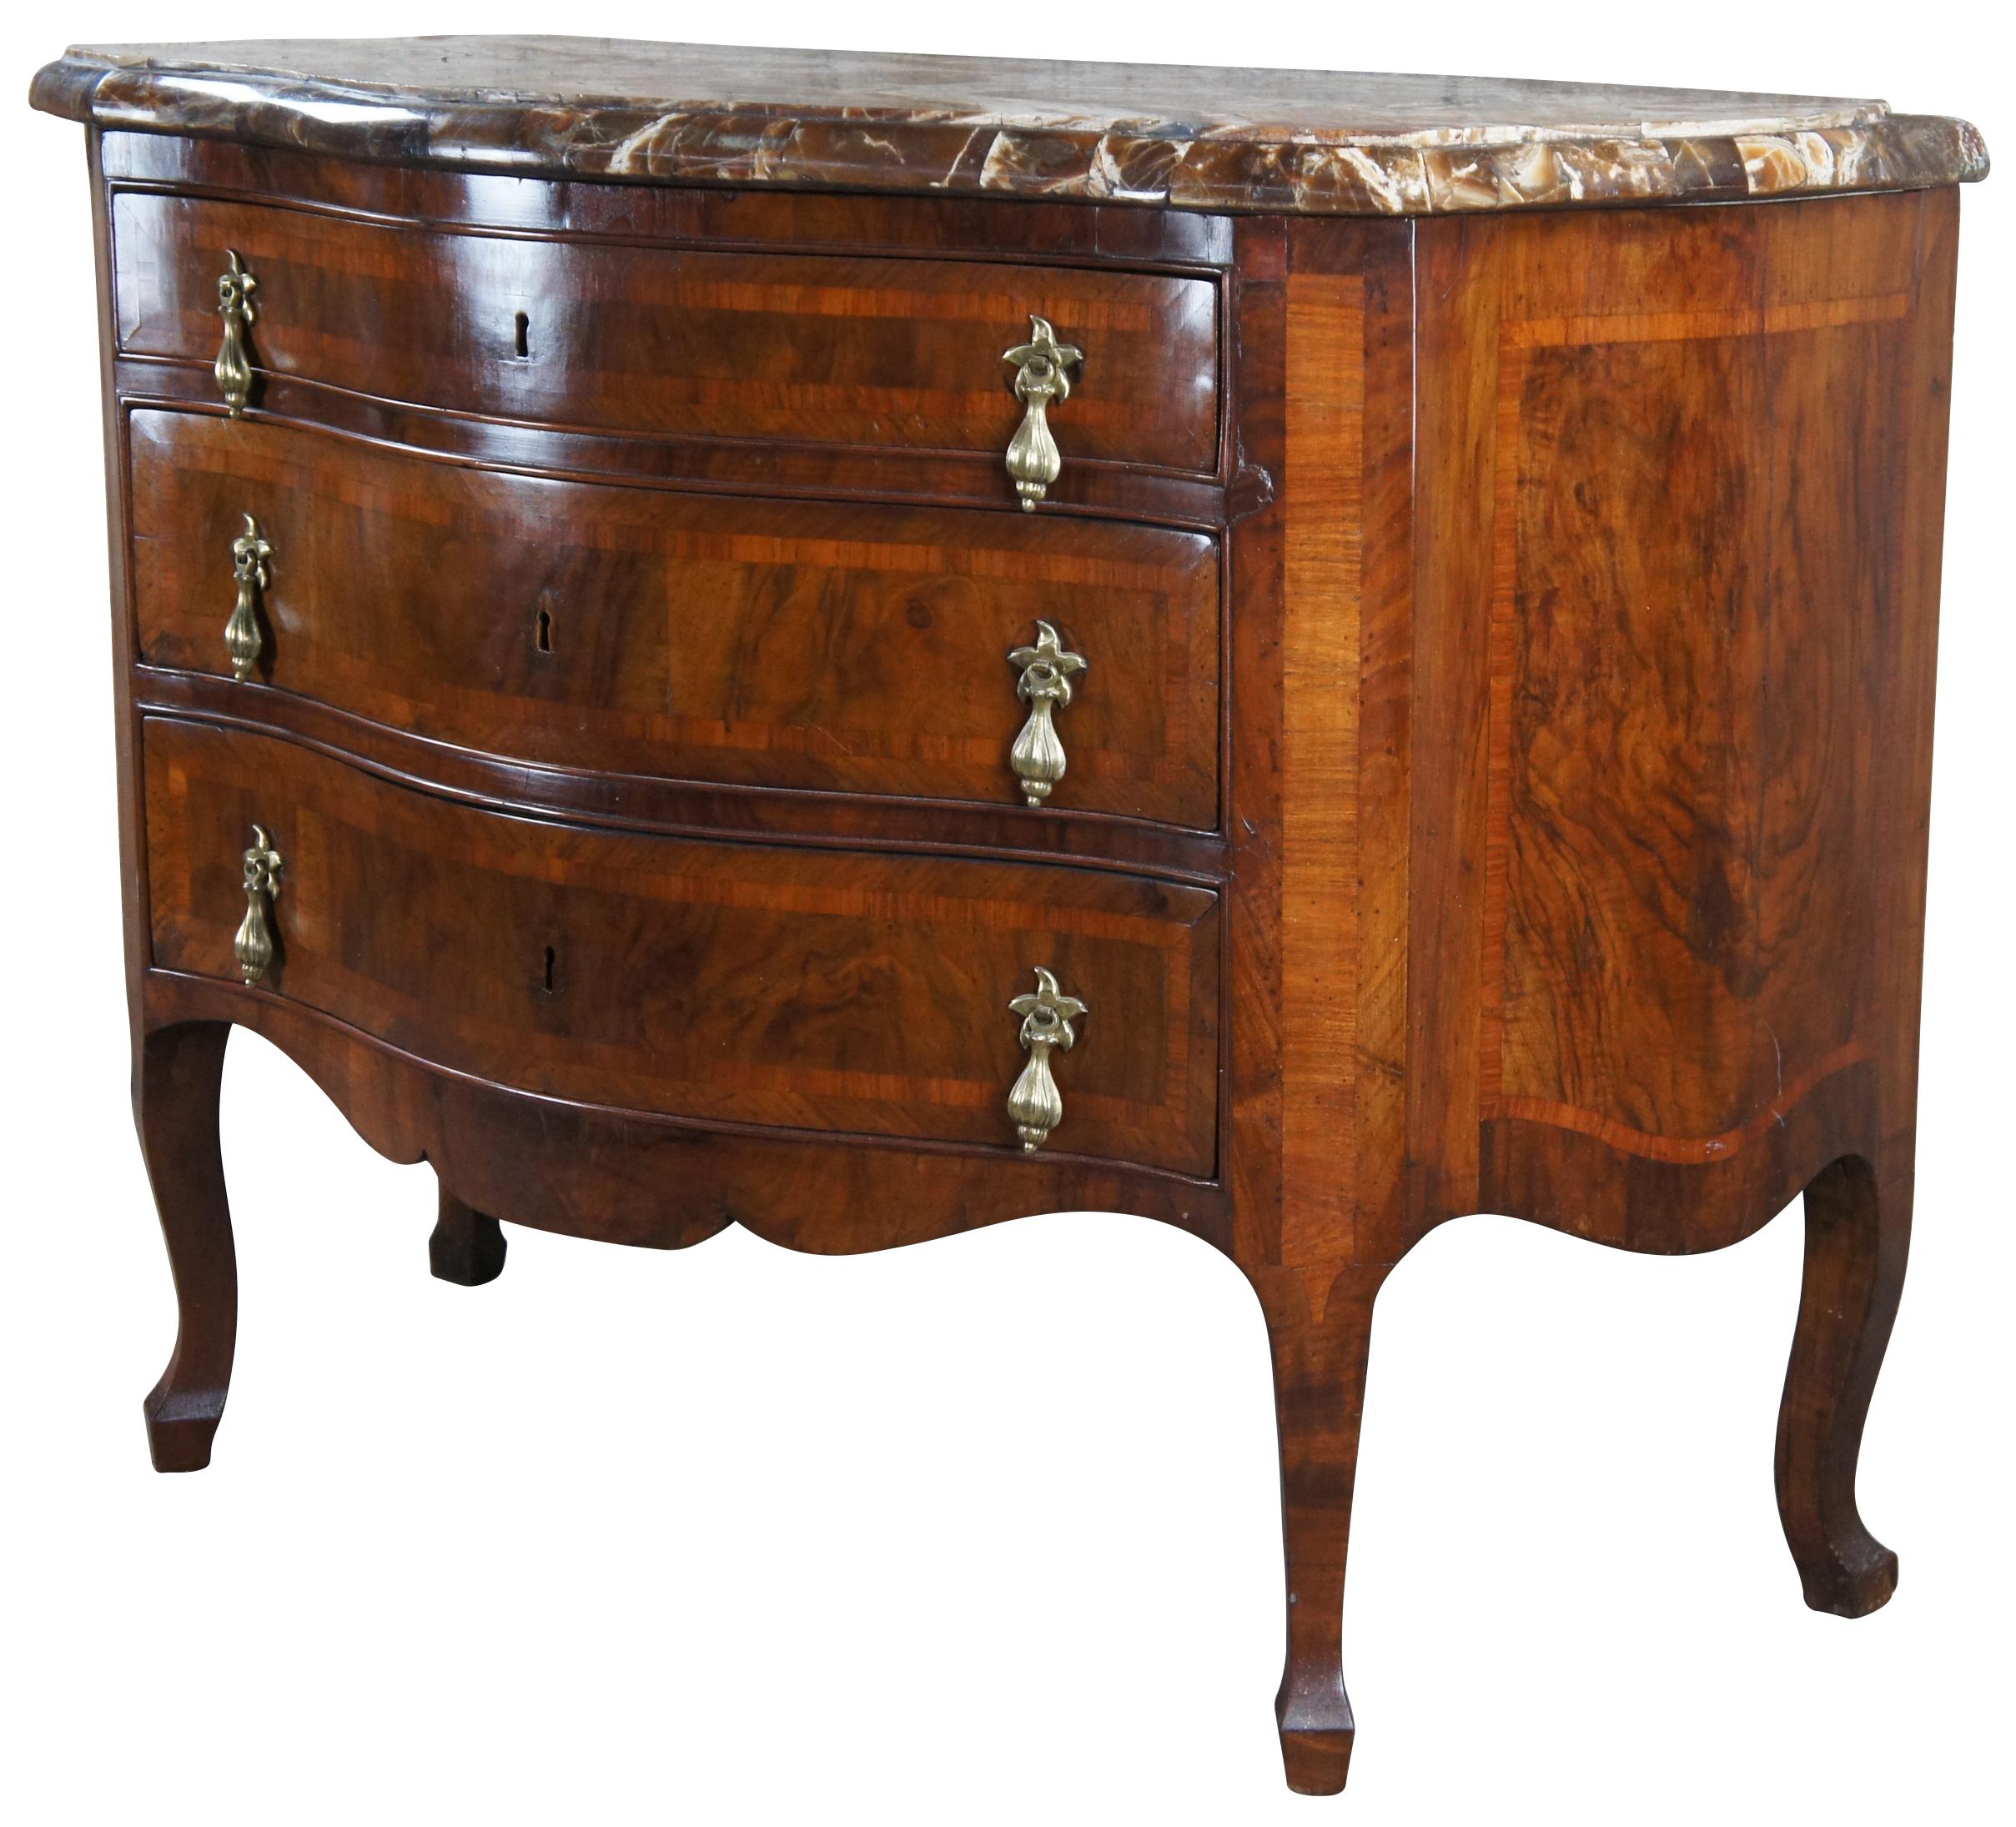 An exquisite late 18th / early 19th century commode. Made from mahogany with an oxbow form featuring cross banding walnut and burled panels. Includes three hand dovetailed drawers with brass dangle pulls. The case is supported by square tapered legs.